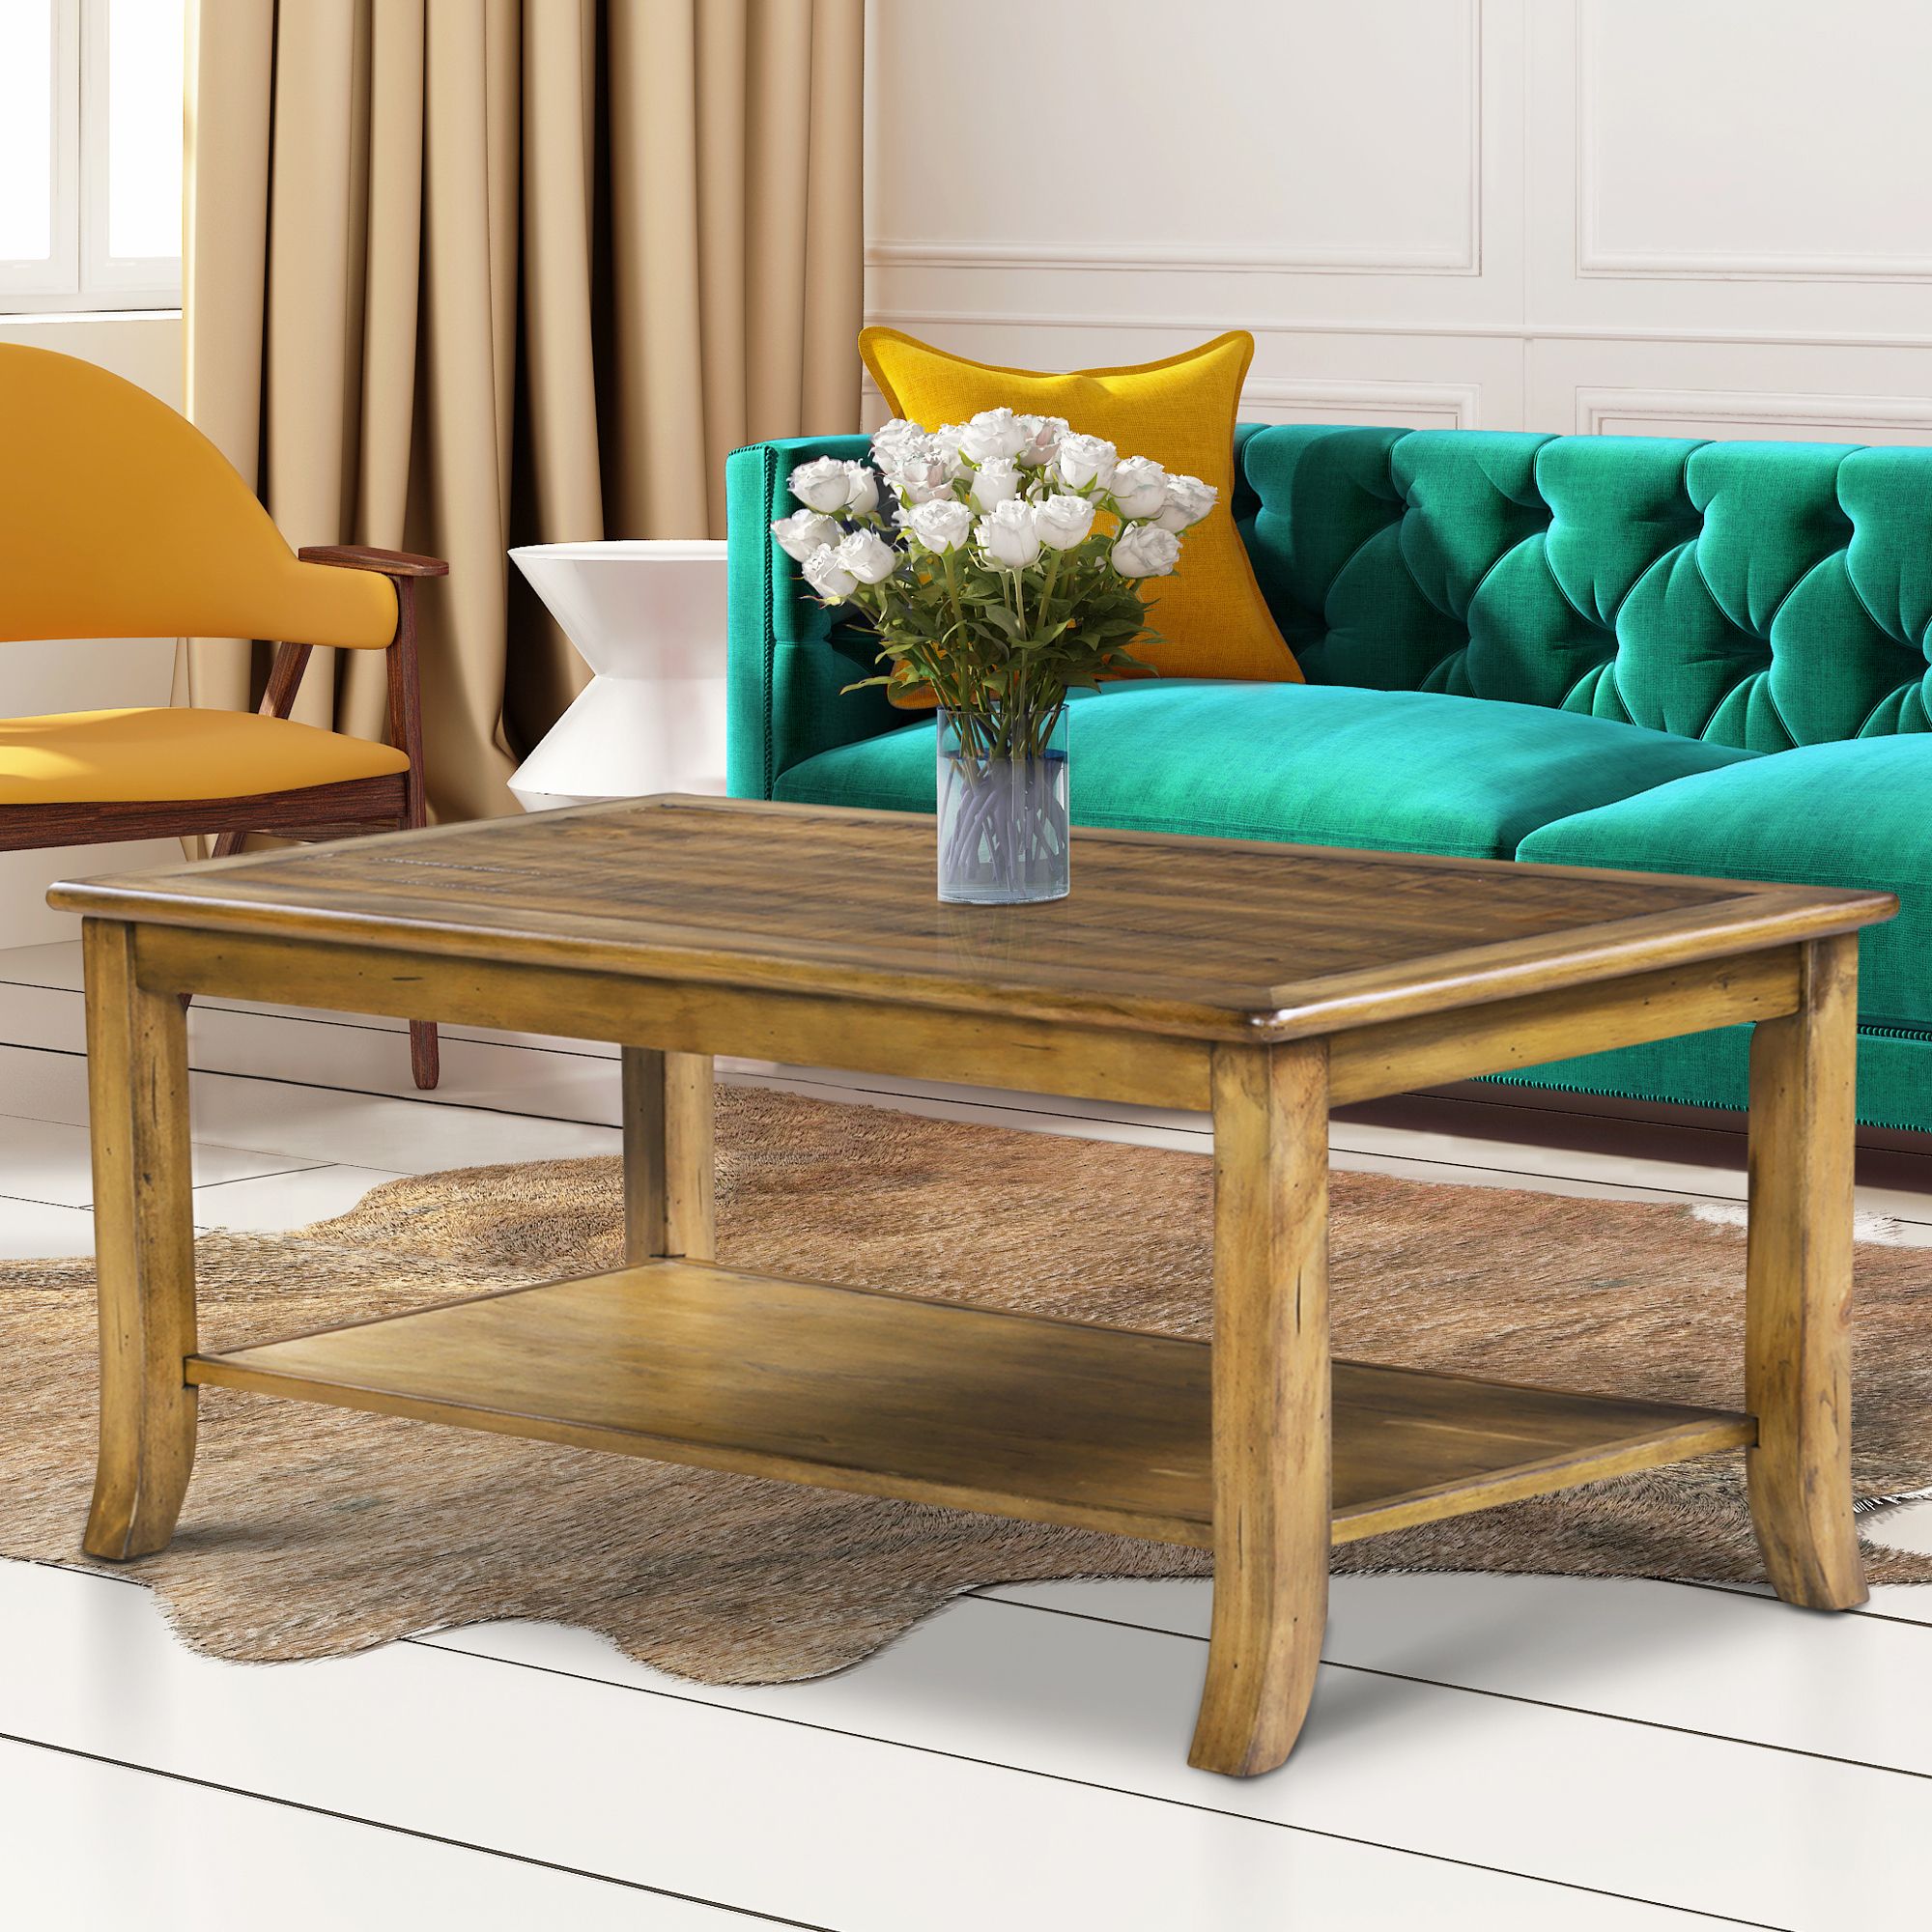 Granrest Cocktail Coffee Table, Rustic Maple Brown With Fashionable Rustic Oak And Black Coffee Tables (Gallery 1 of 20)